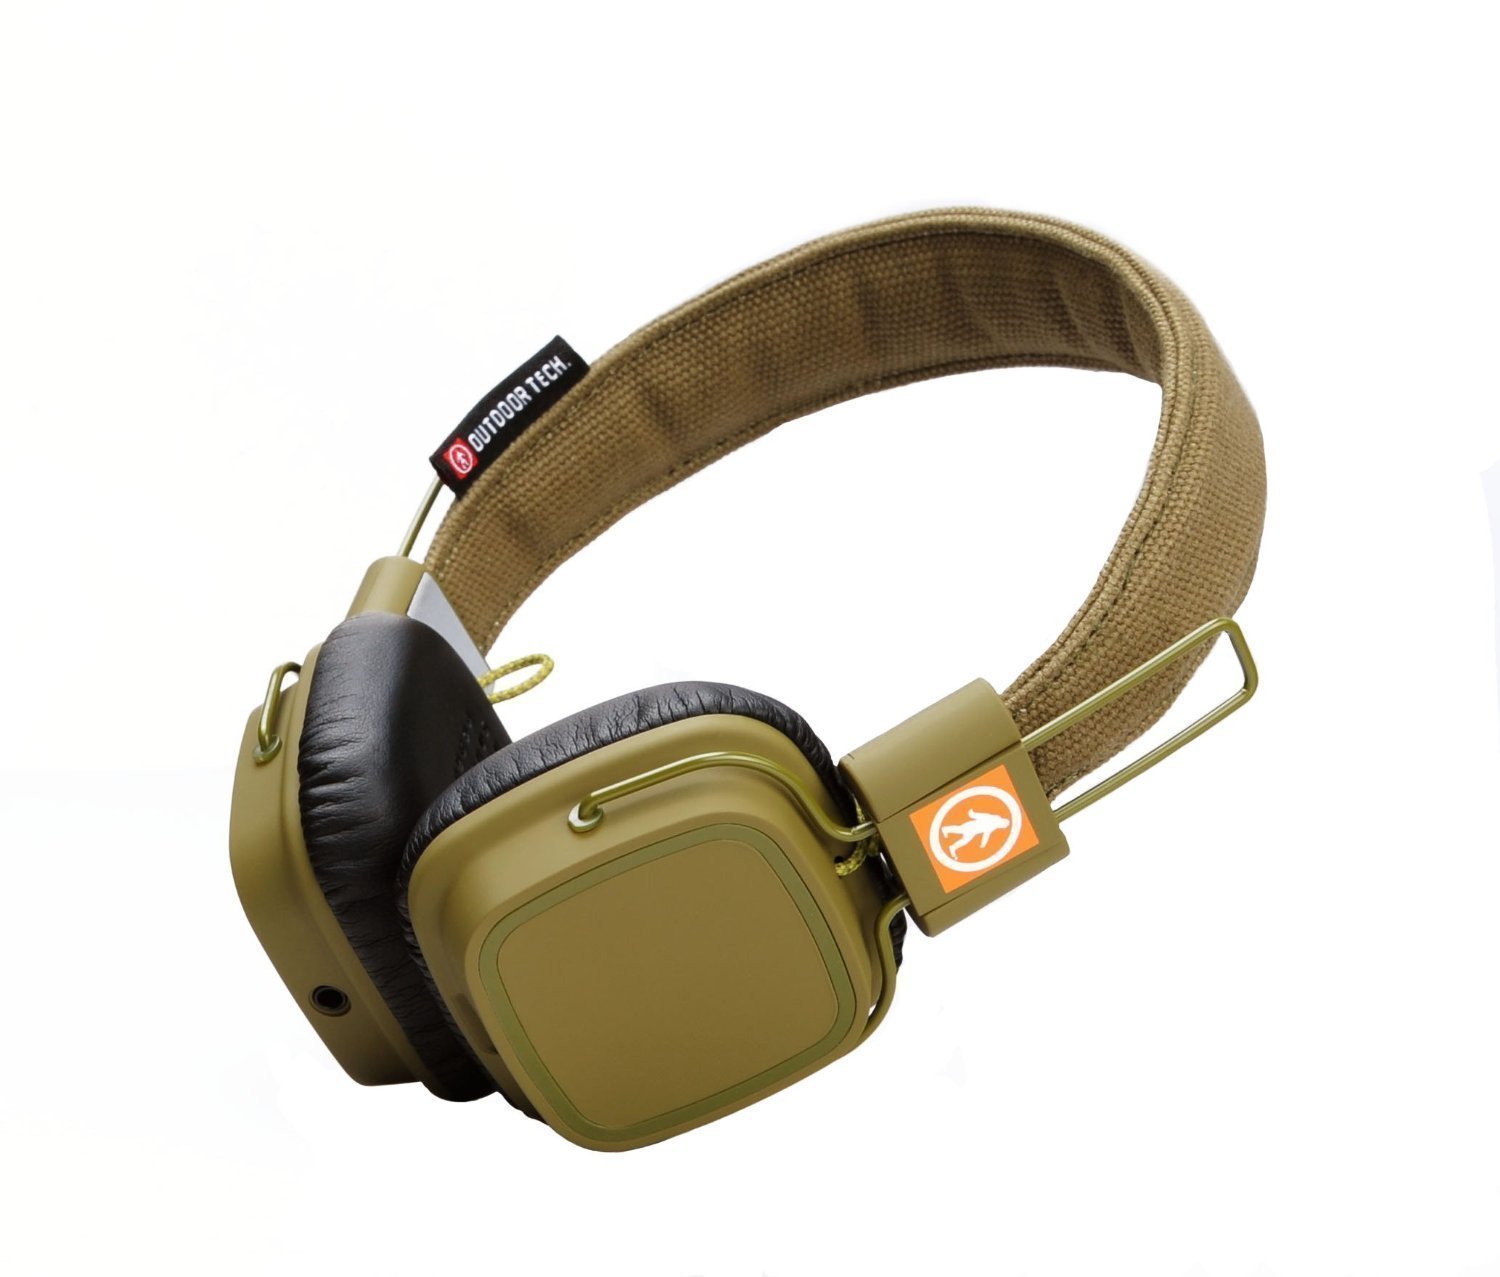 Drahtlose On-Ear-Kopfhörer Outdoor Tech Privates - Wireless Touch Control Headphones - Army Green